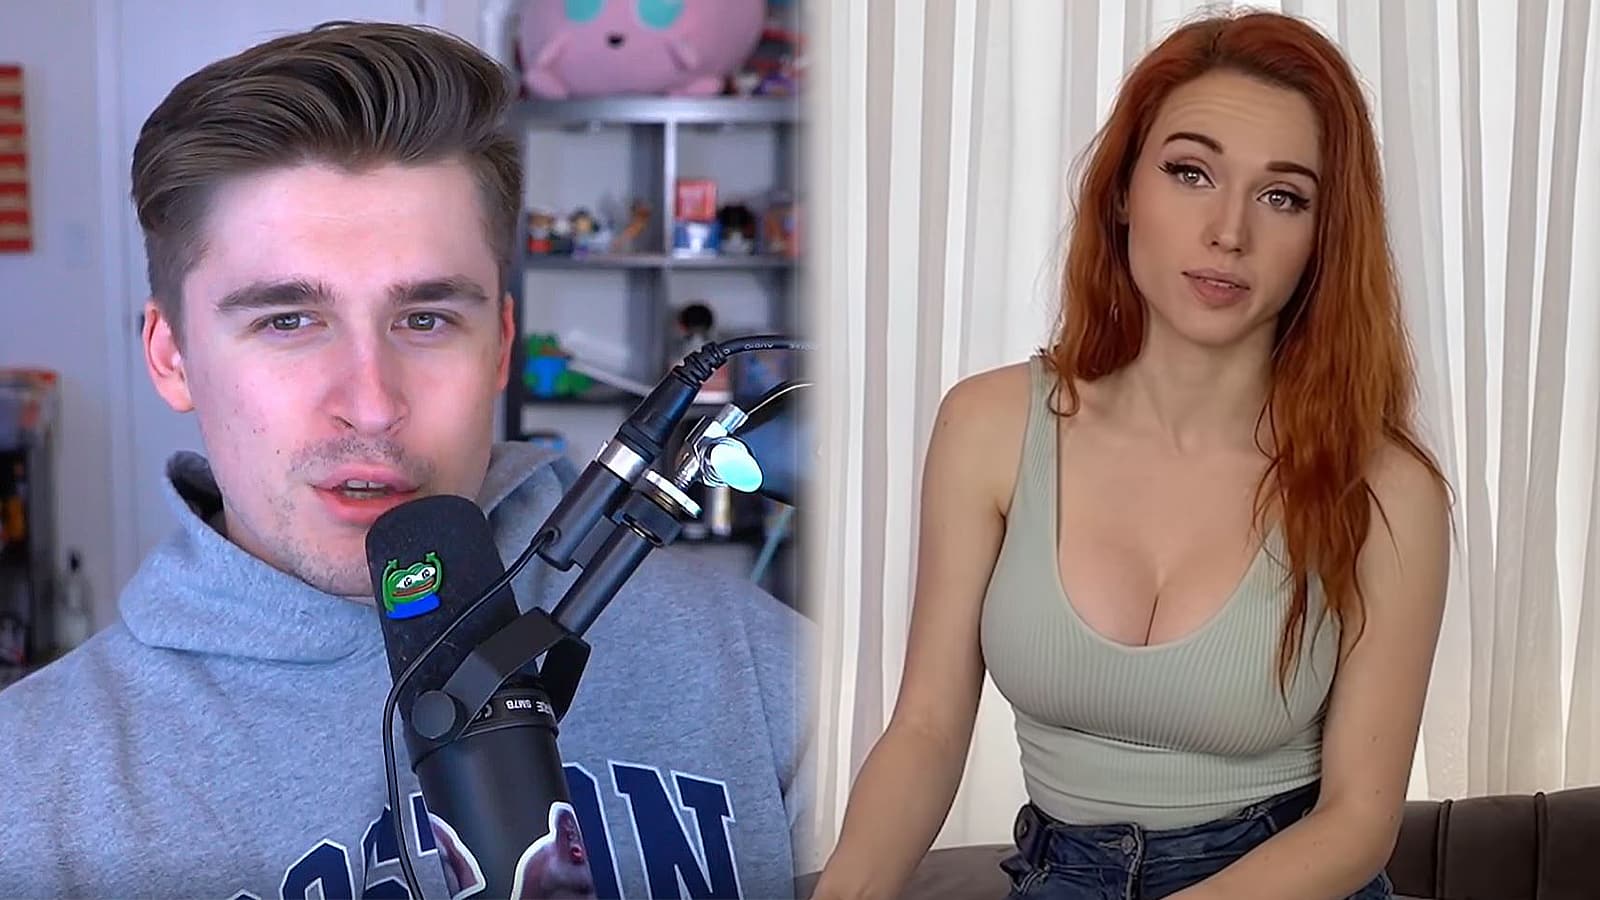 Twitch star Ludwig explains how a photo with Amouranth cost him a brand dea...